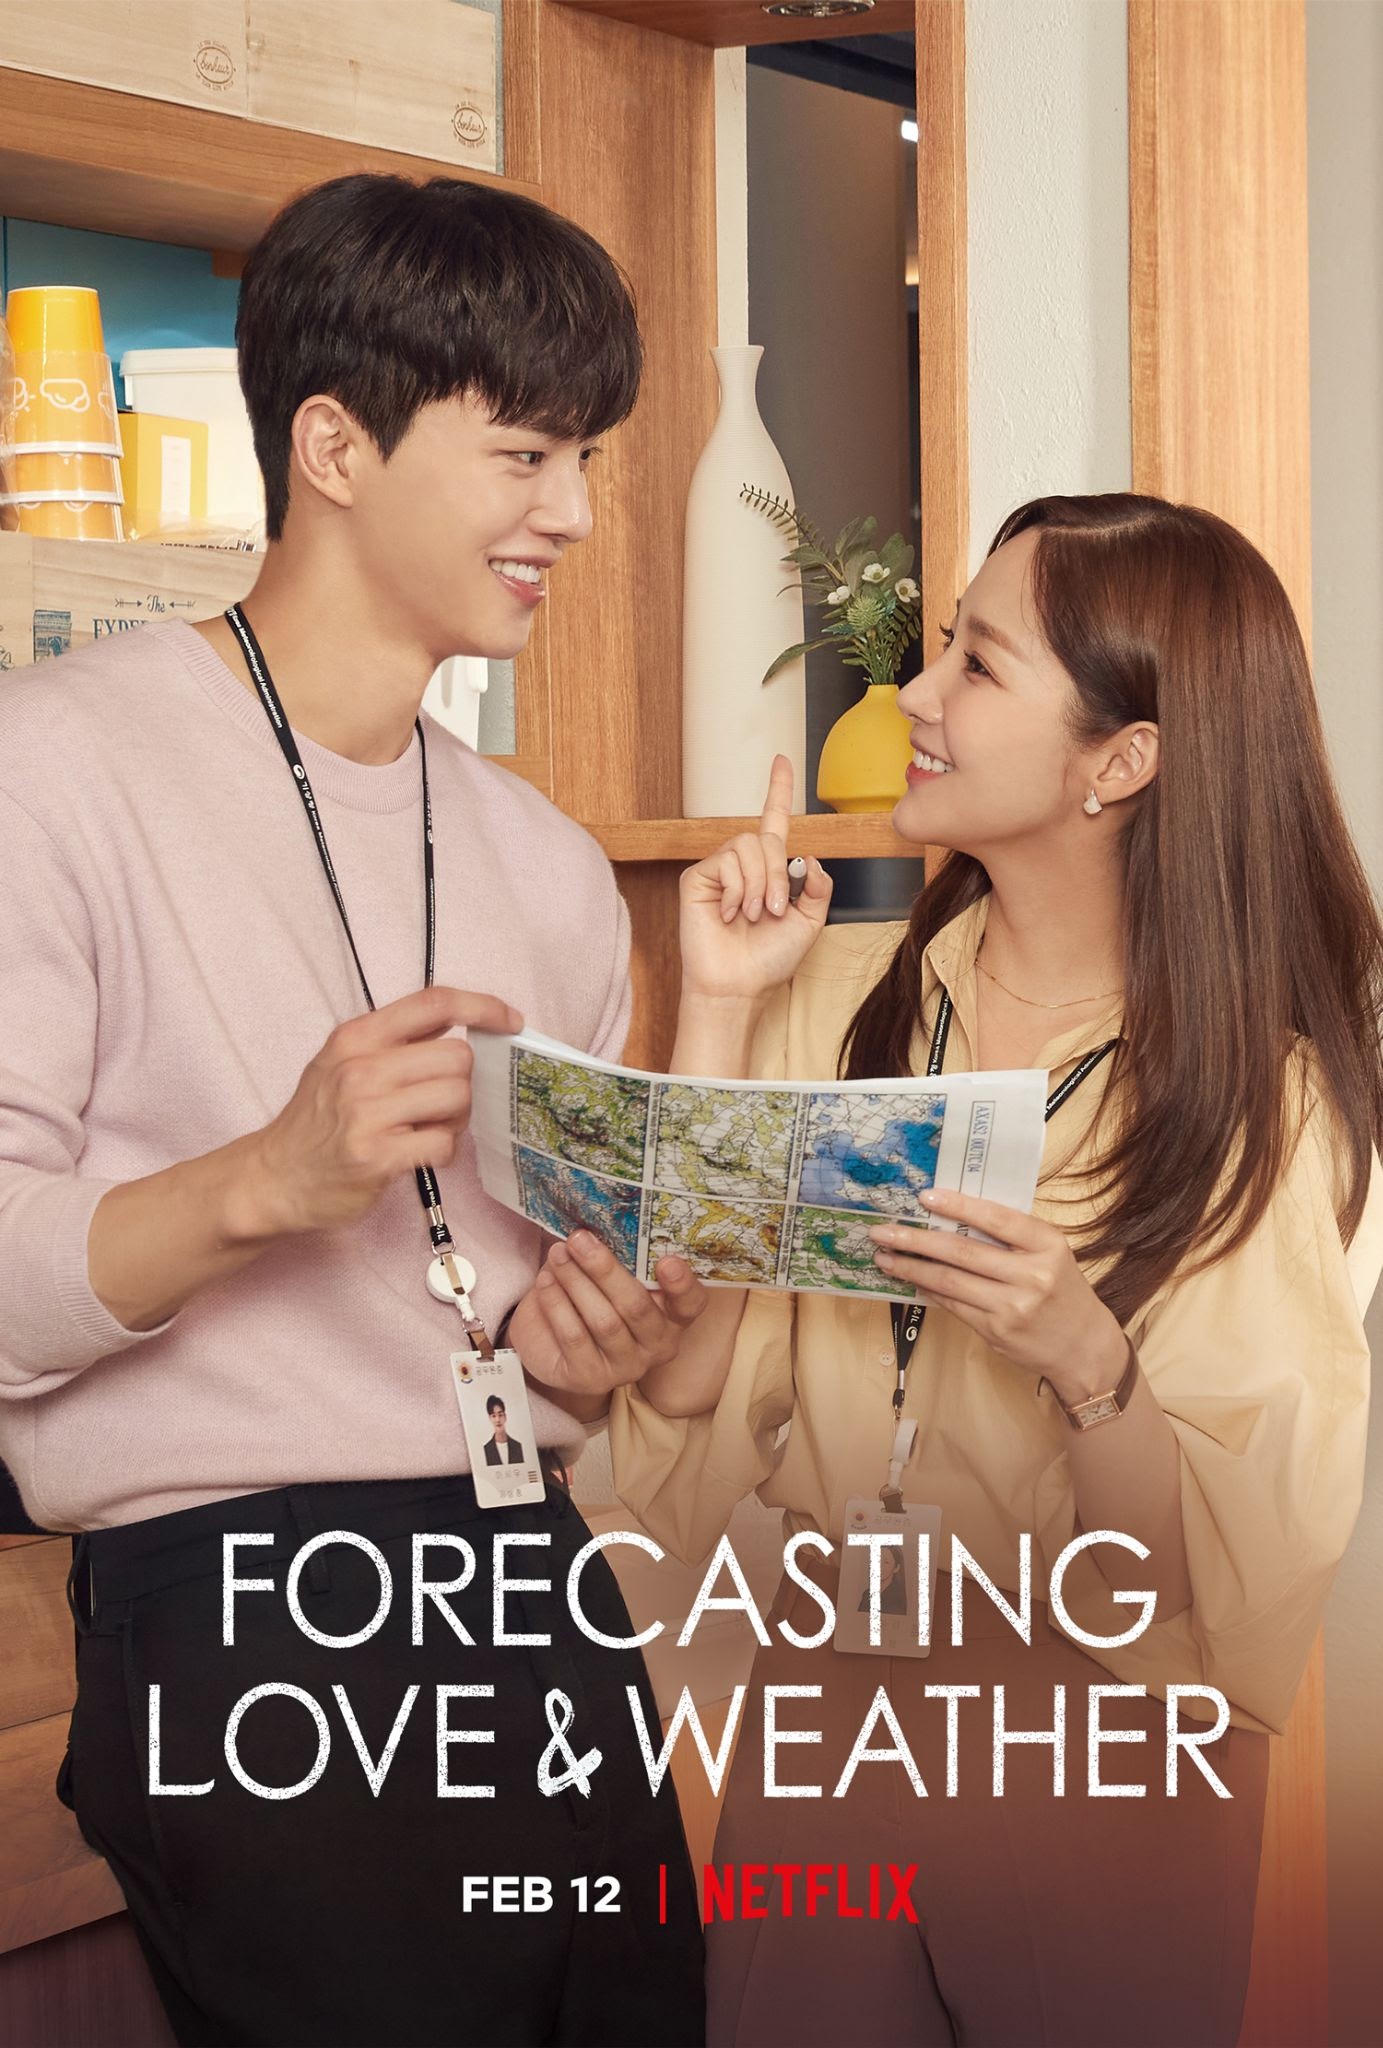 "Forecasting Love and Weather" Orients Workplace Struggles & Romance To